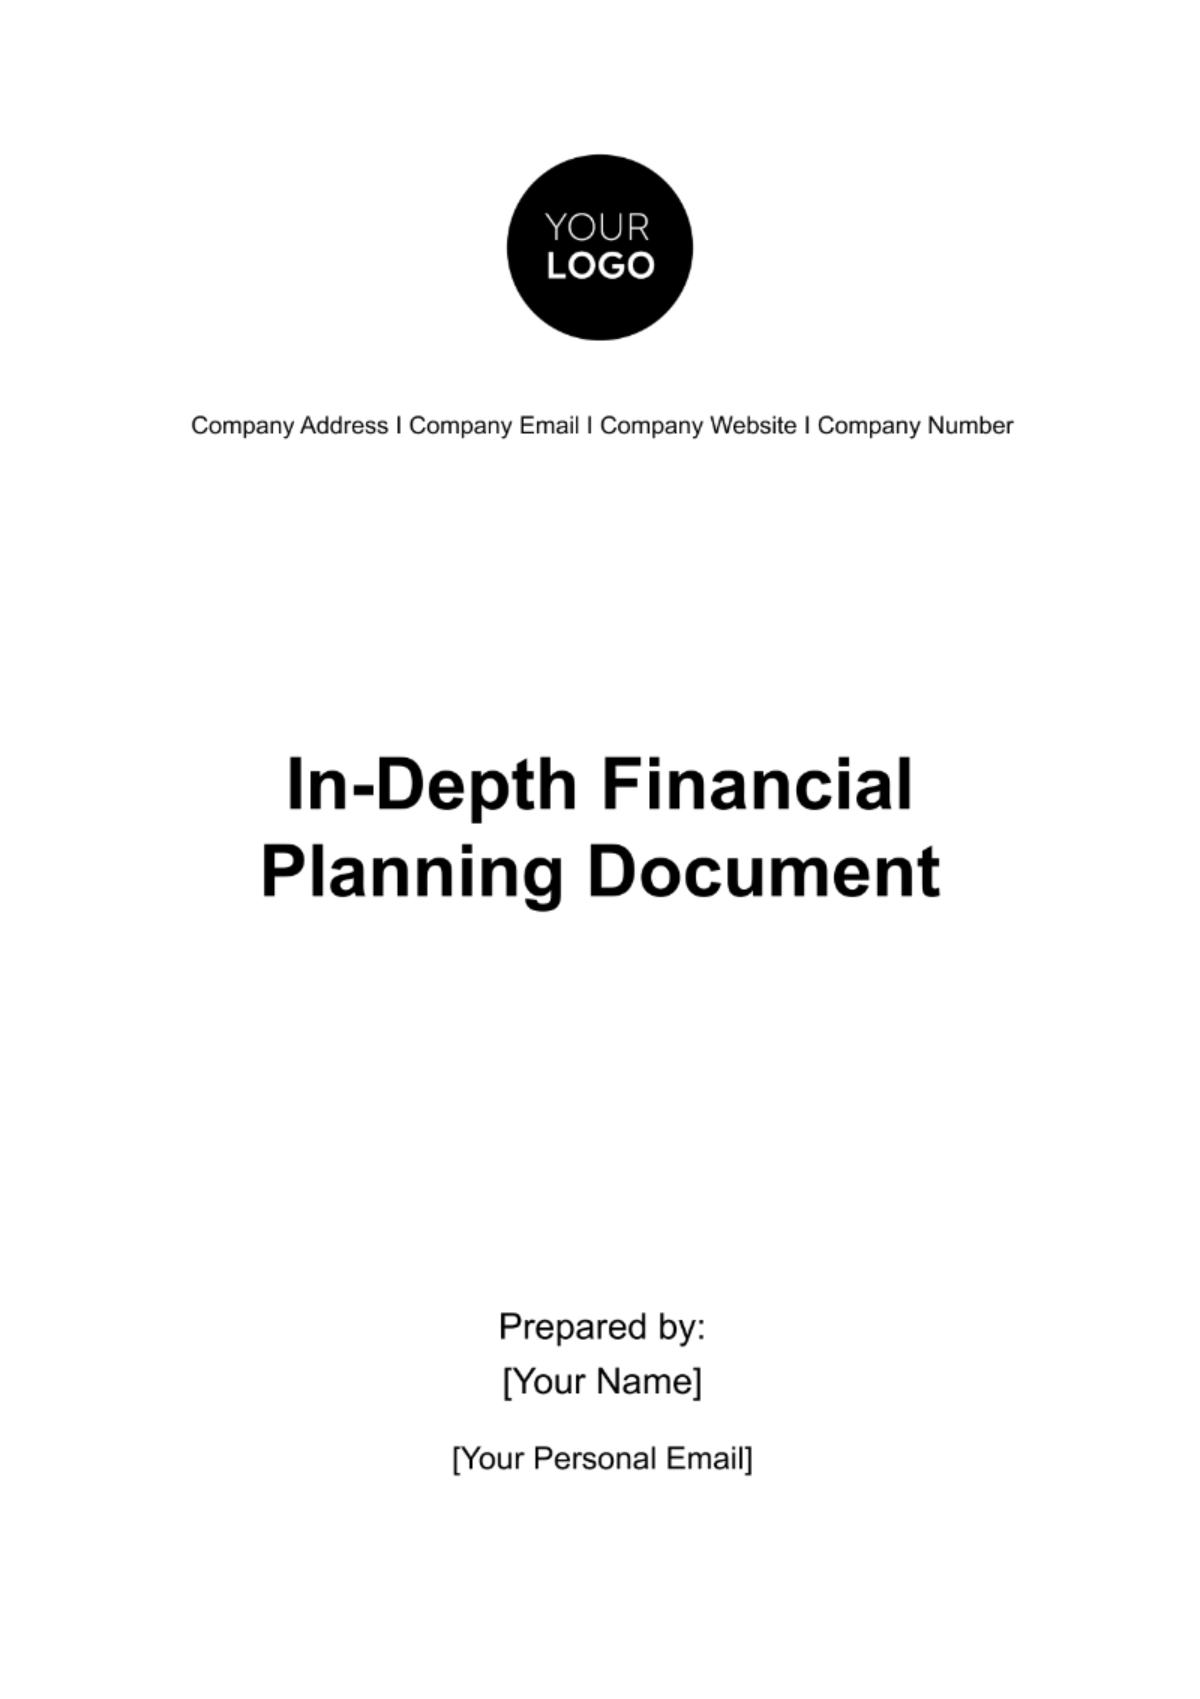 Free In-Depth Financial Planning Document Template